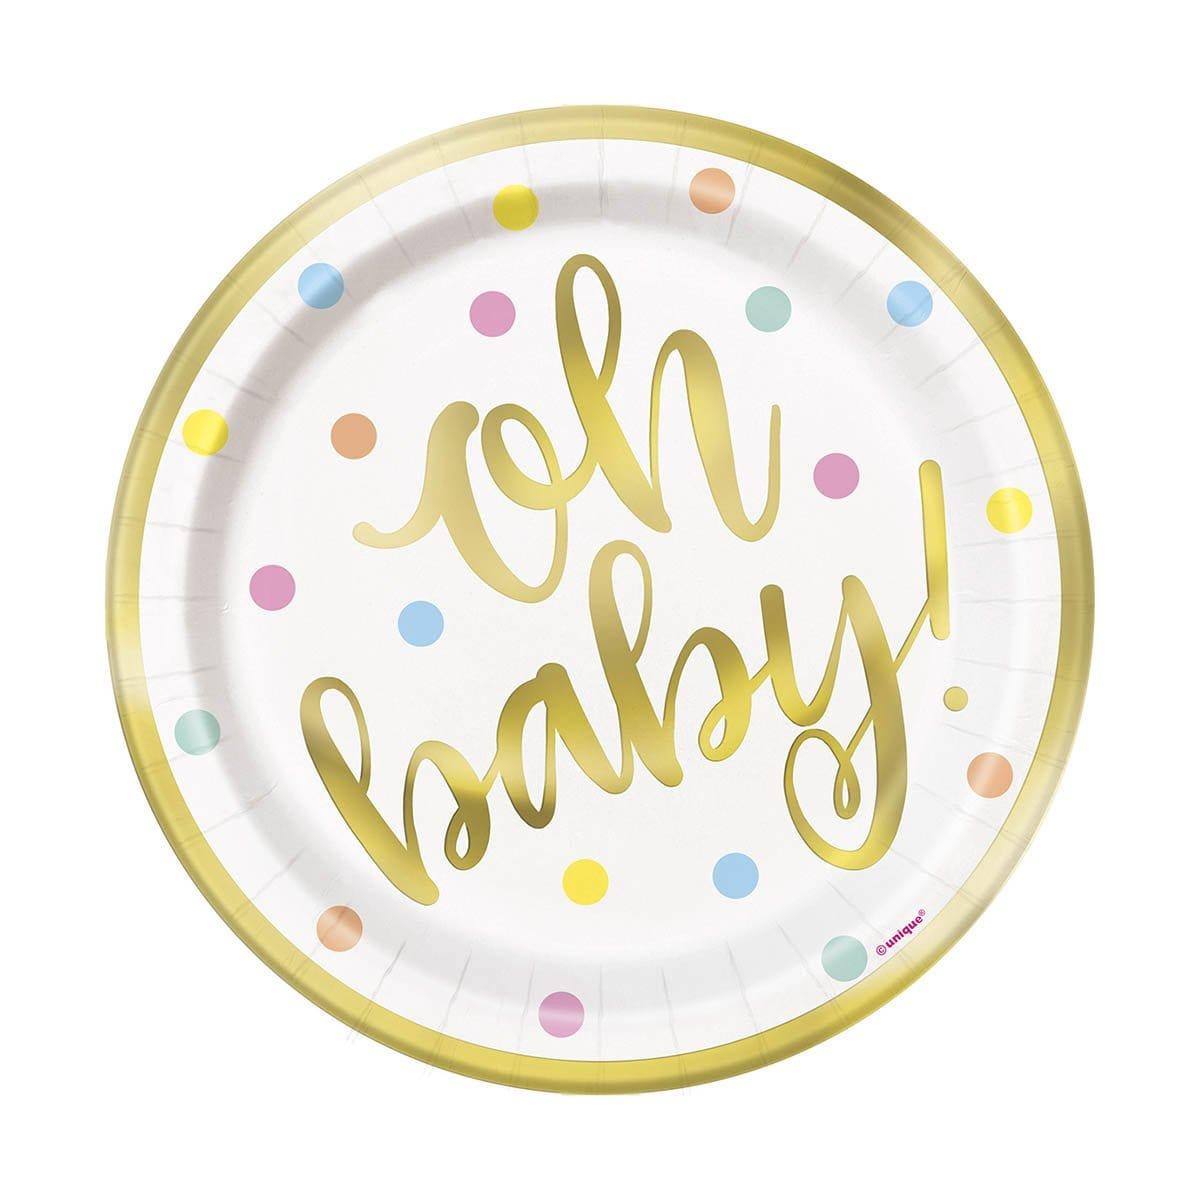 Buy Baby Shower Oh Baby paper plates 7 inches, 8 per package sold at Party Expert